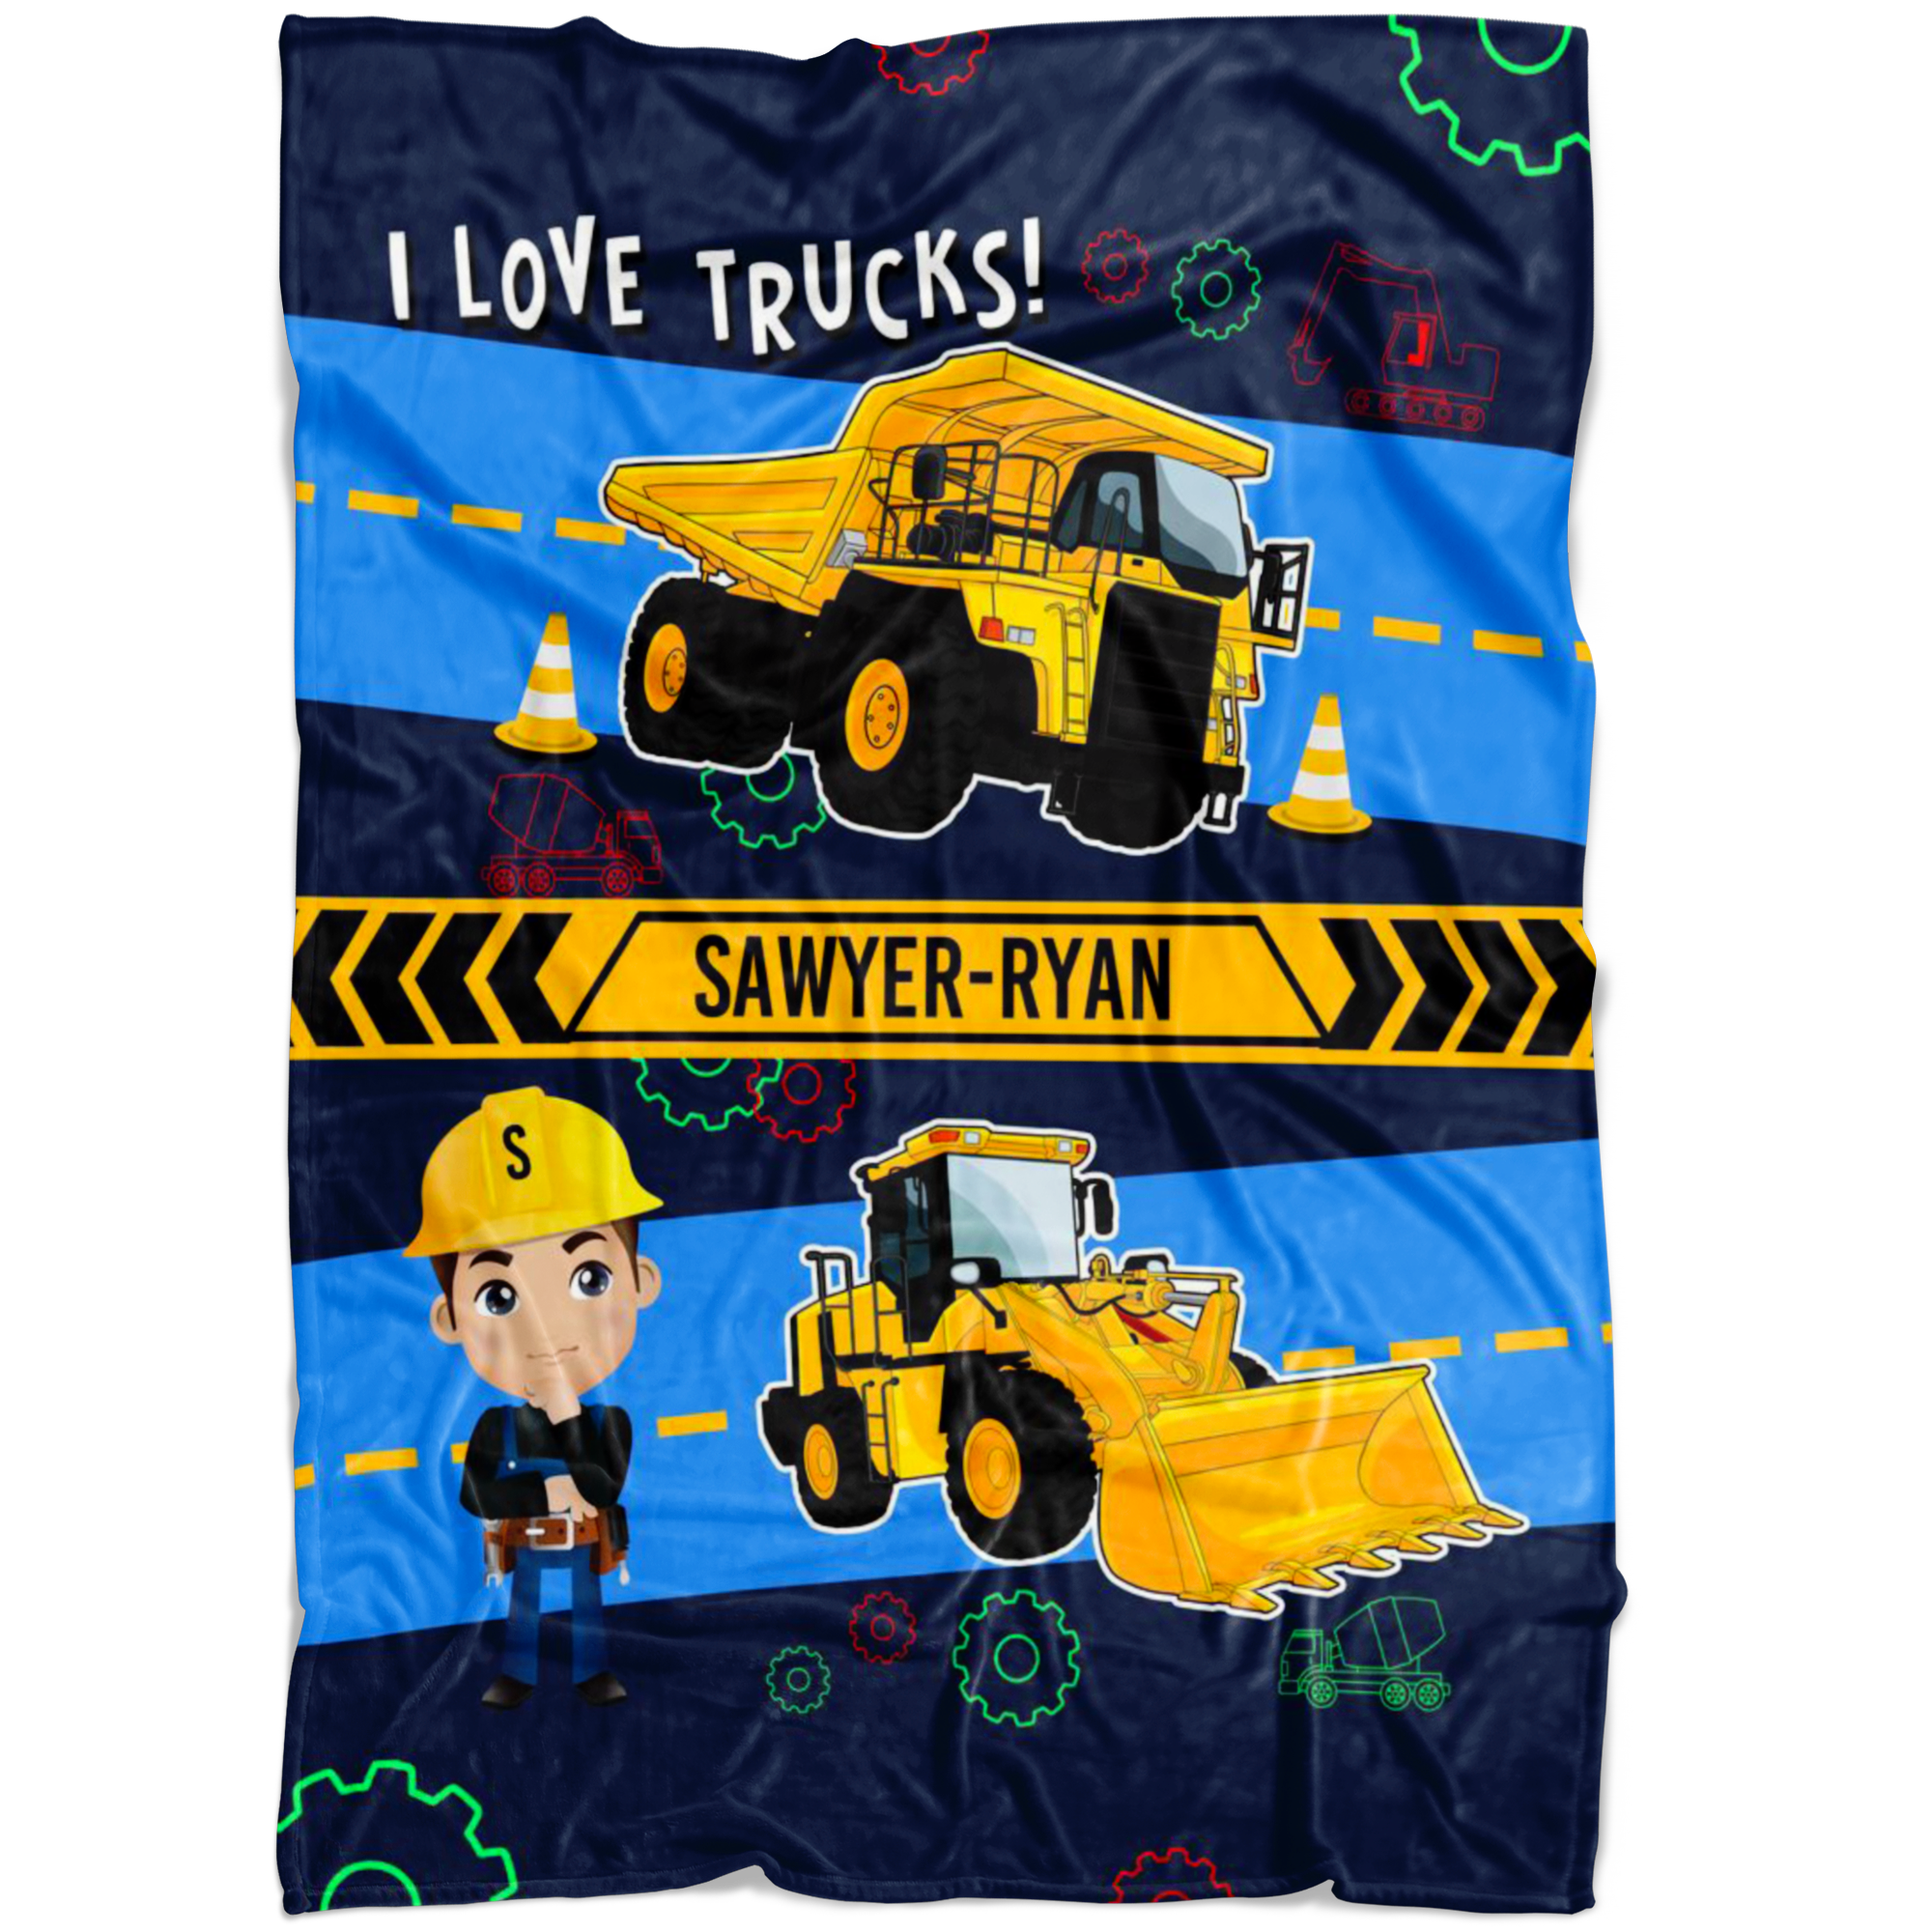 Personalized Name I Love Trucks Blanket for Boys & Girls with Character Personalization - Sawyer-Ryan